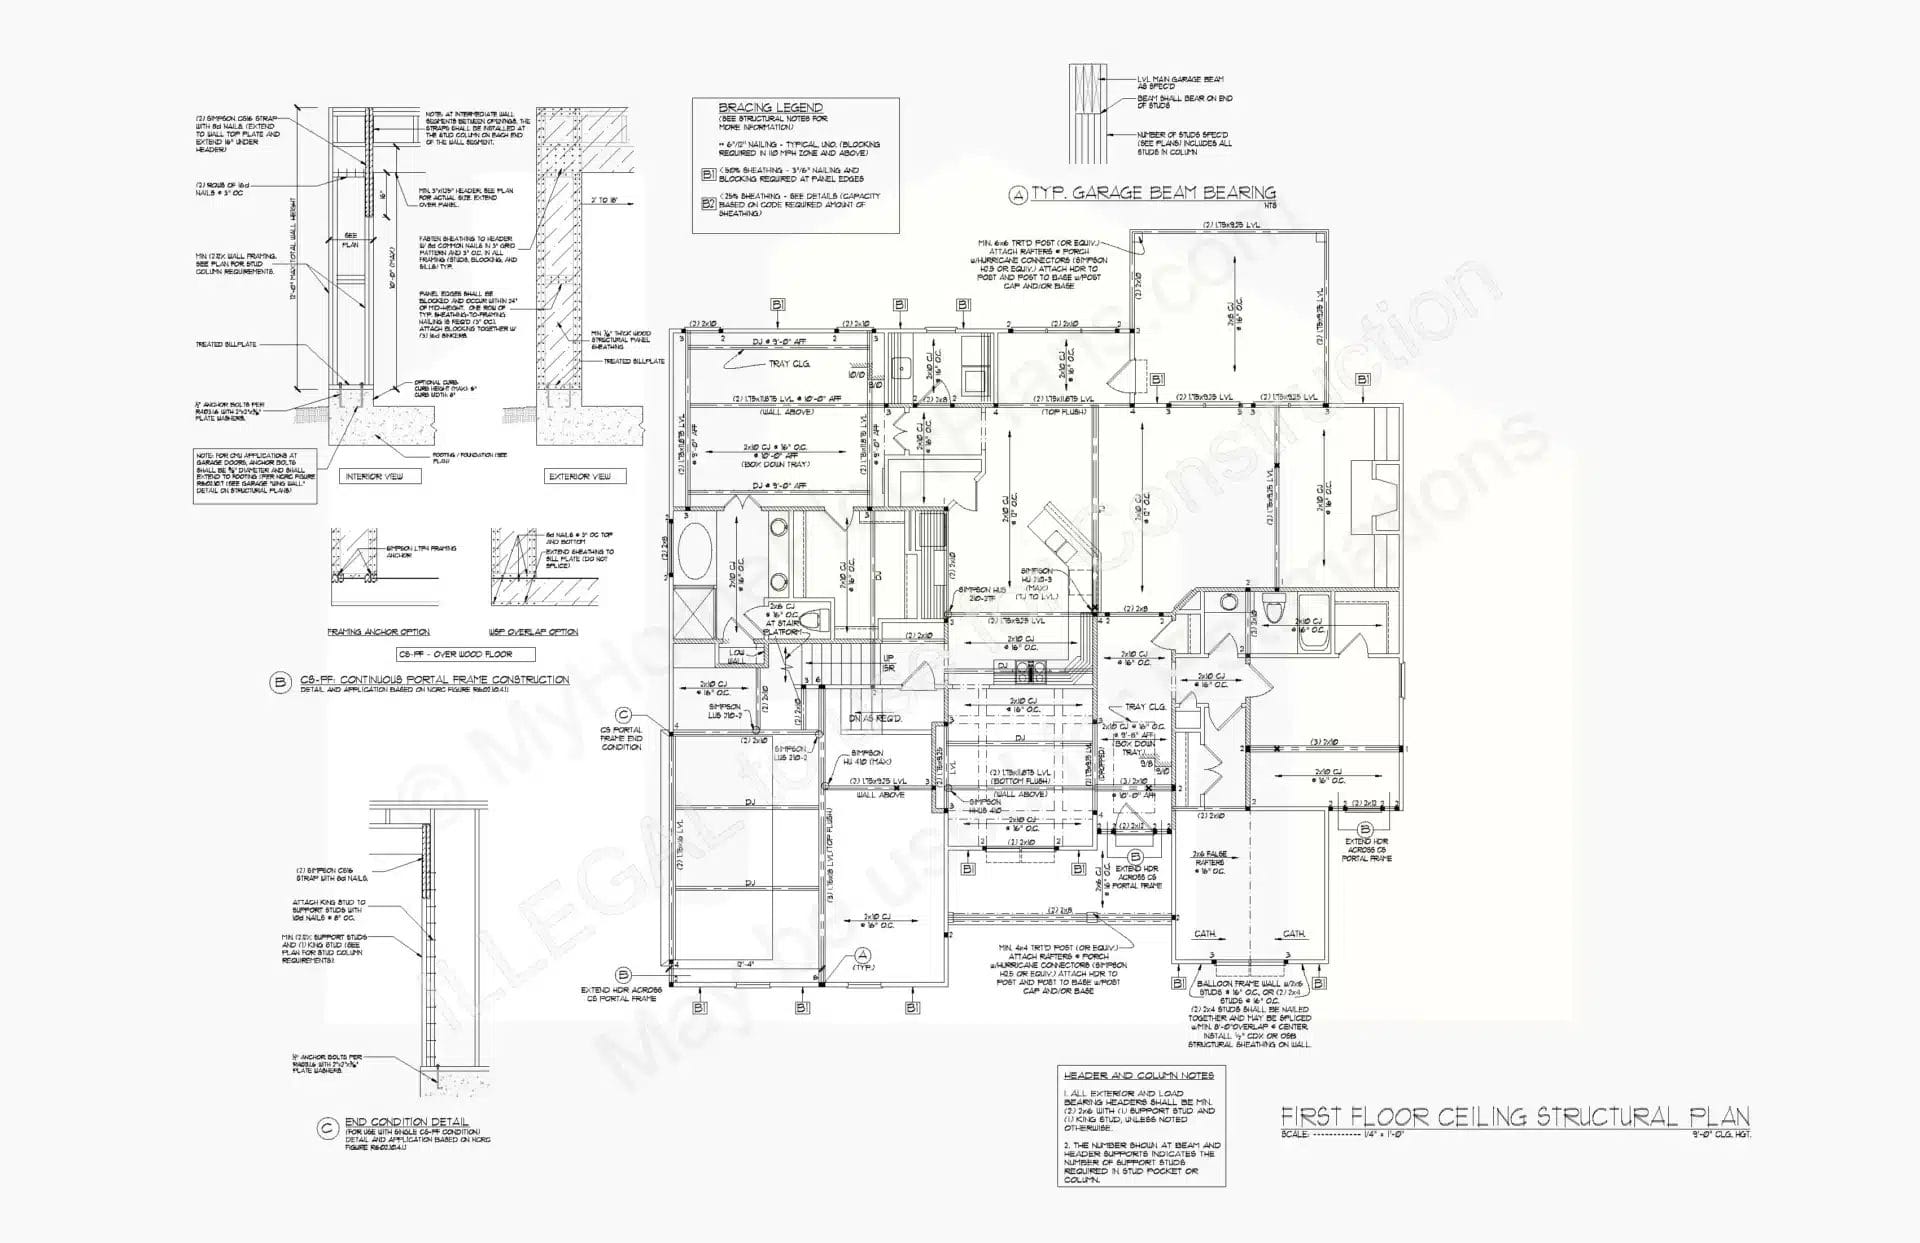 This is a detailed architectural blueprint of a 13-1721 first floor ceiling structural design, featuring labeled rooms, measurements, and construction notes with technical symbols and dimensions, rendered in black and white.